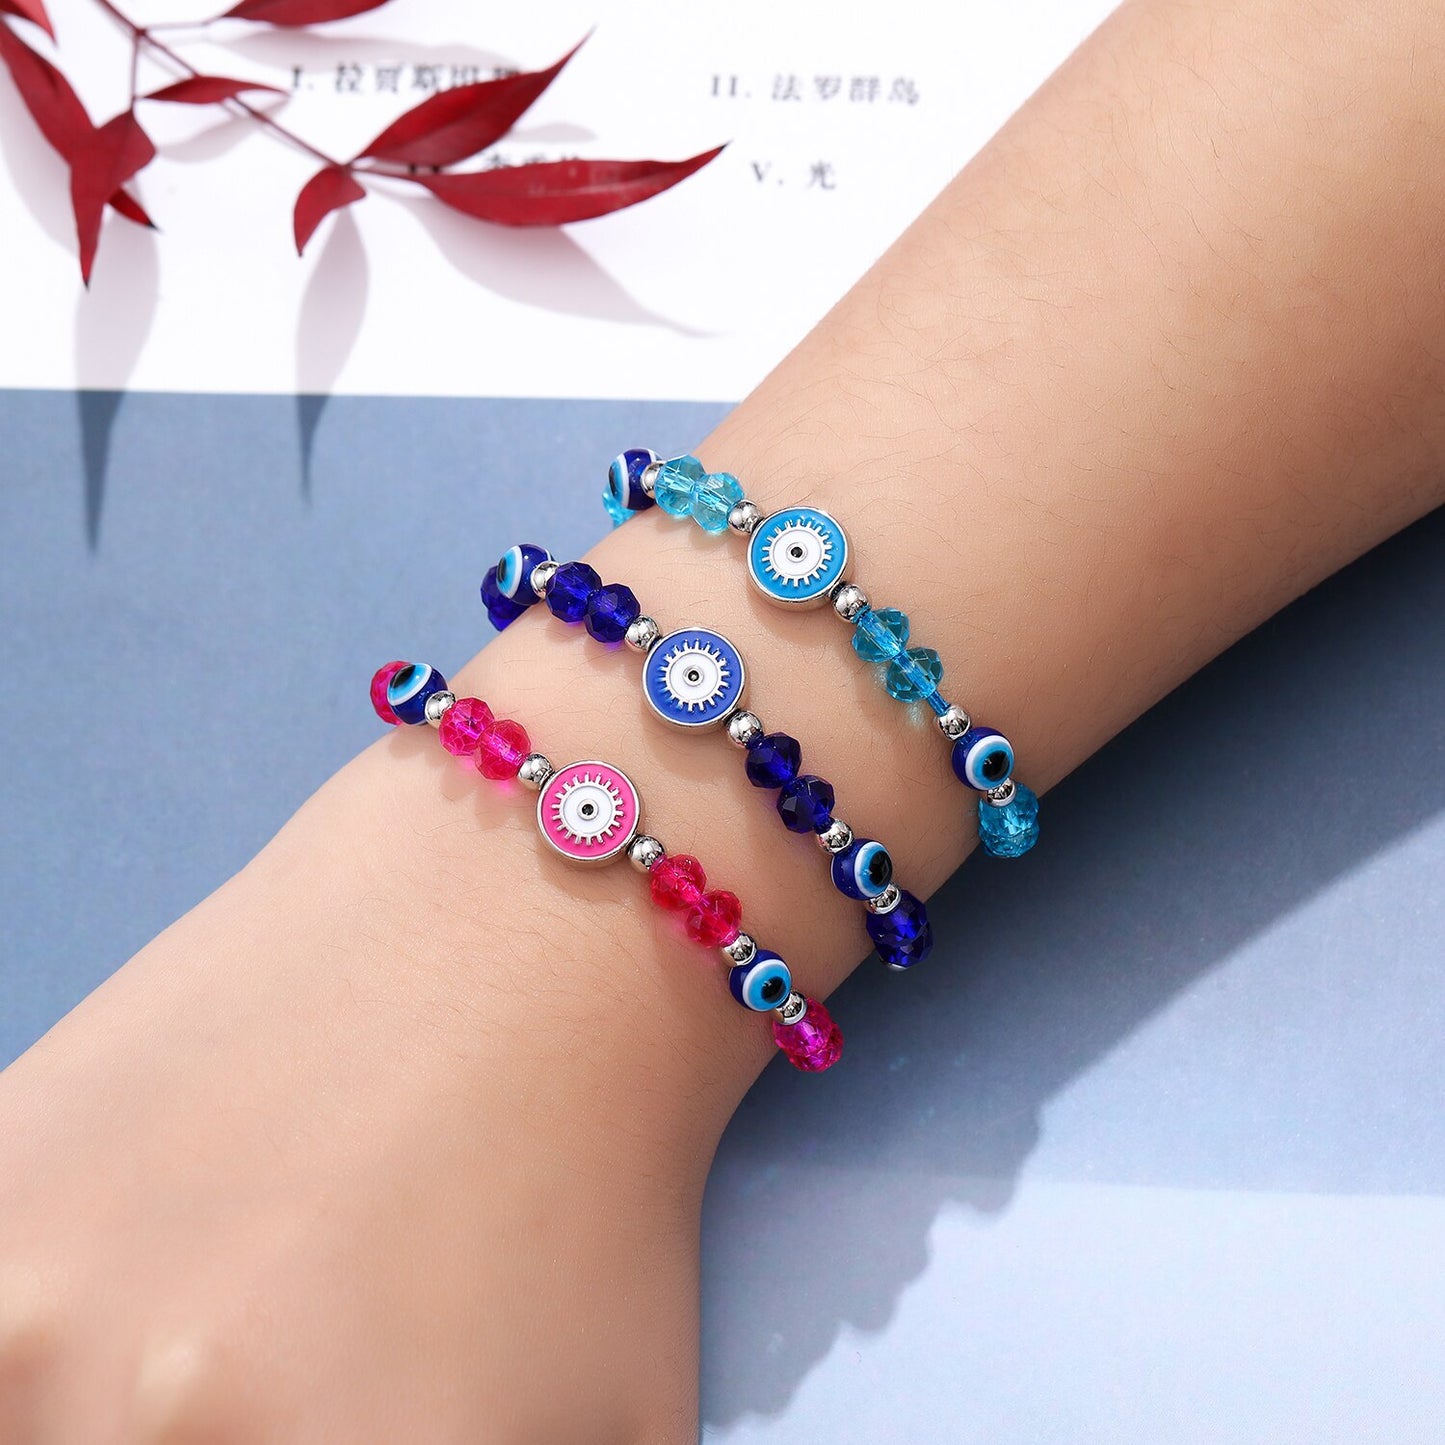 12 Pieces Colorful Crystal Evil Eye Beaded Charms Bracelets for Women Adjustable Beads Anklets Child Girl Wristband Cuff Jewelry